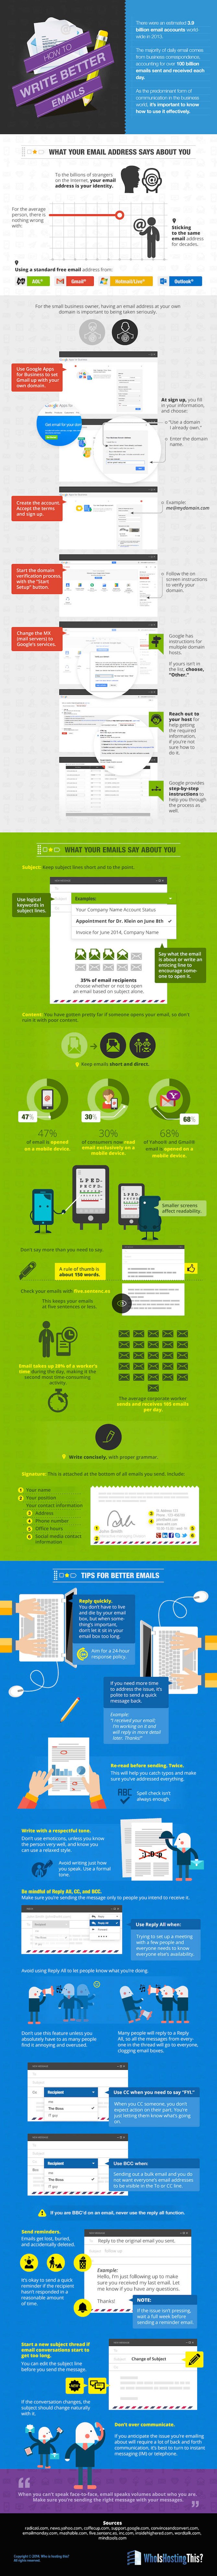 write-better-emails-infographic